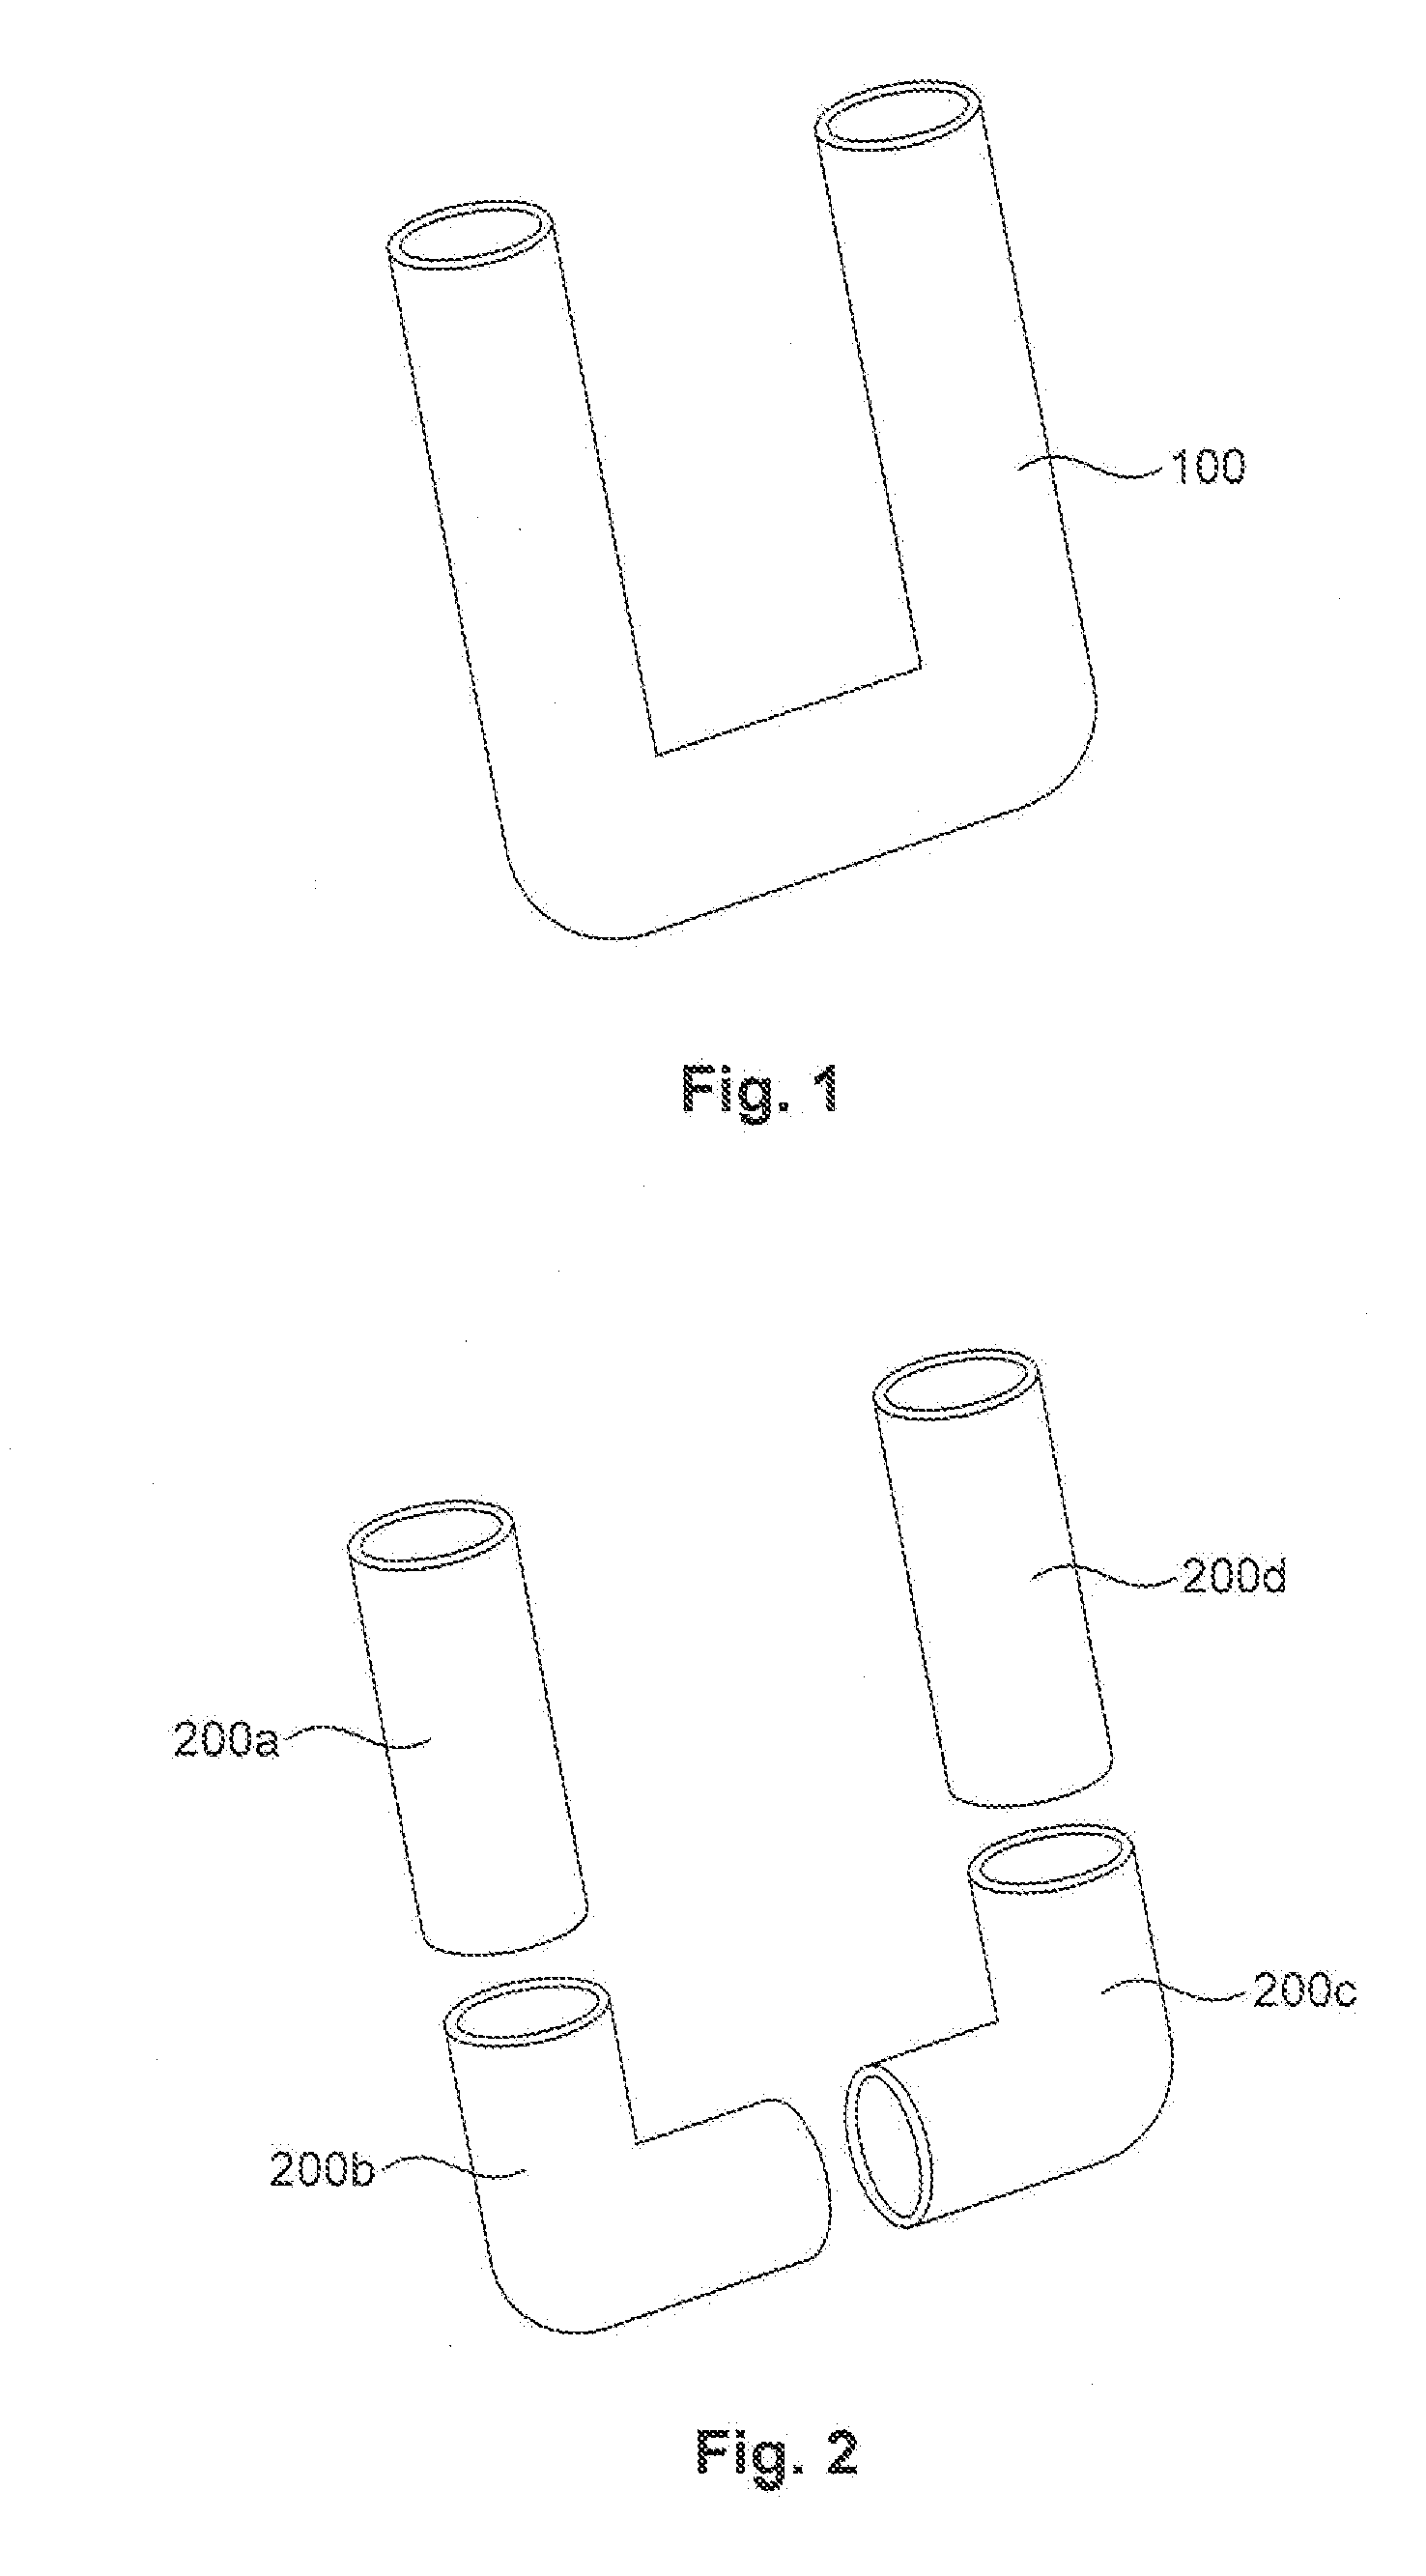 Method For Joining Ceramic Components